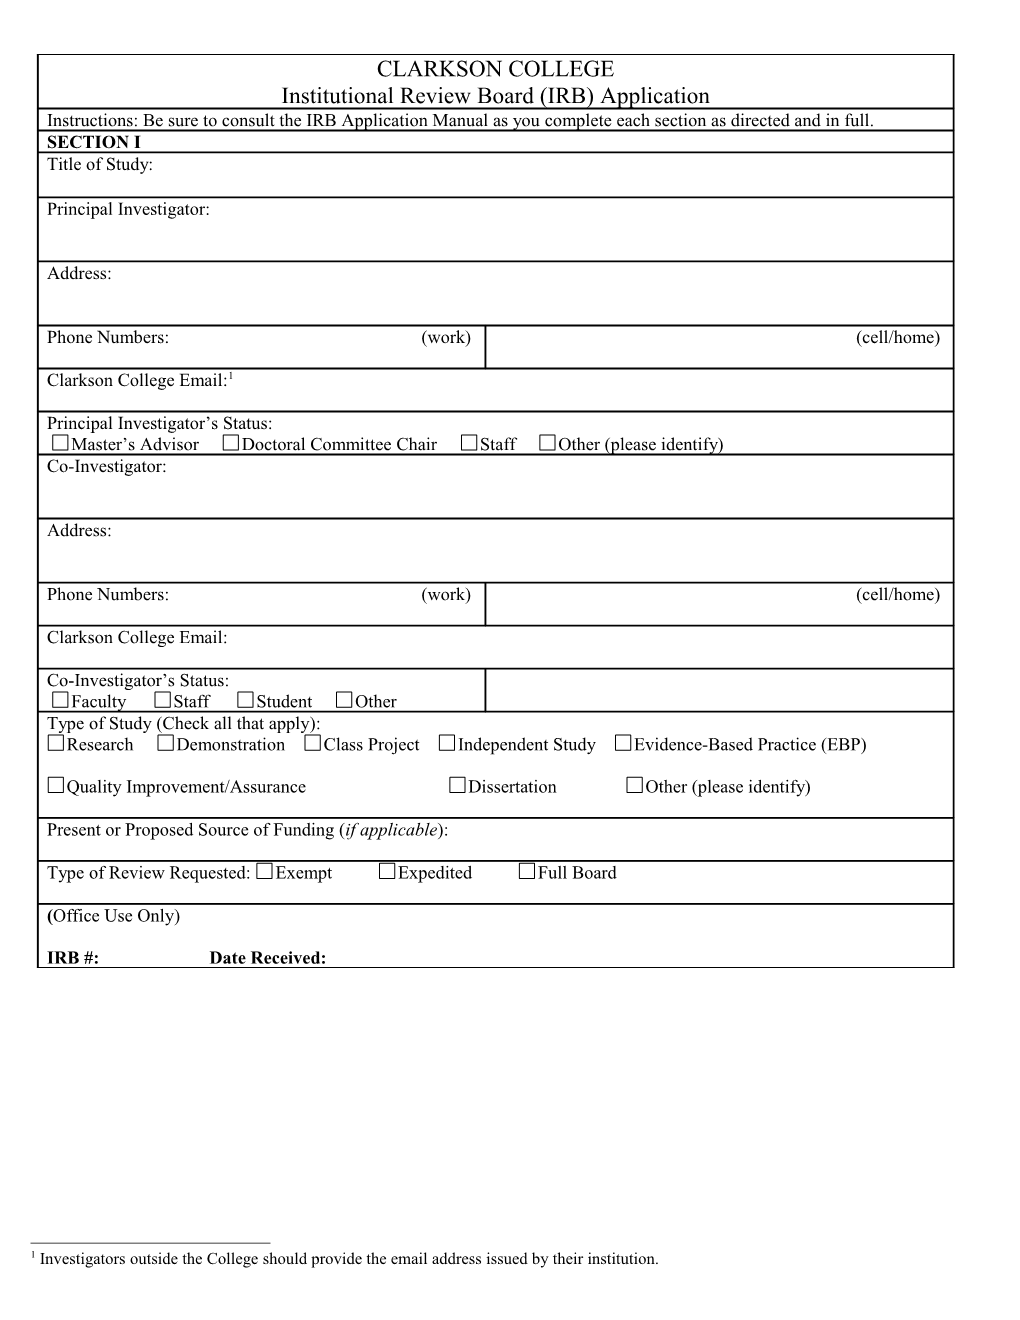 CLARKSON COLLEGE IRB Application